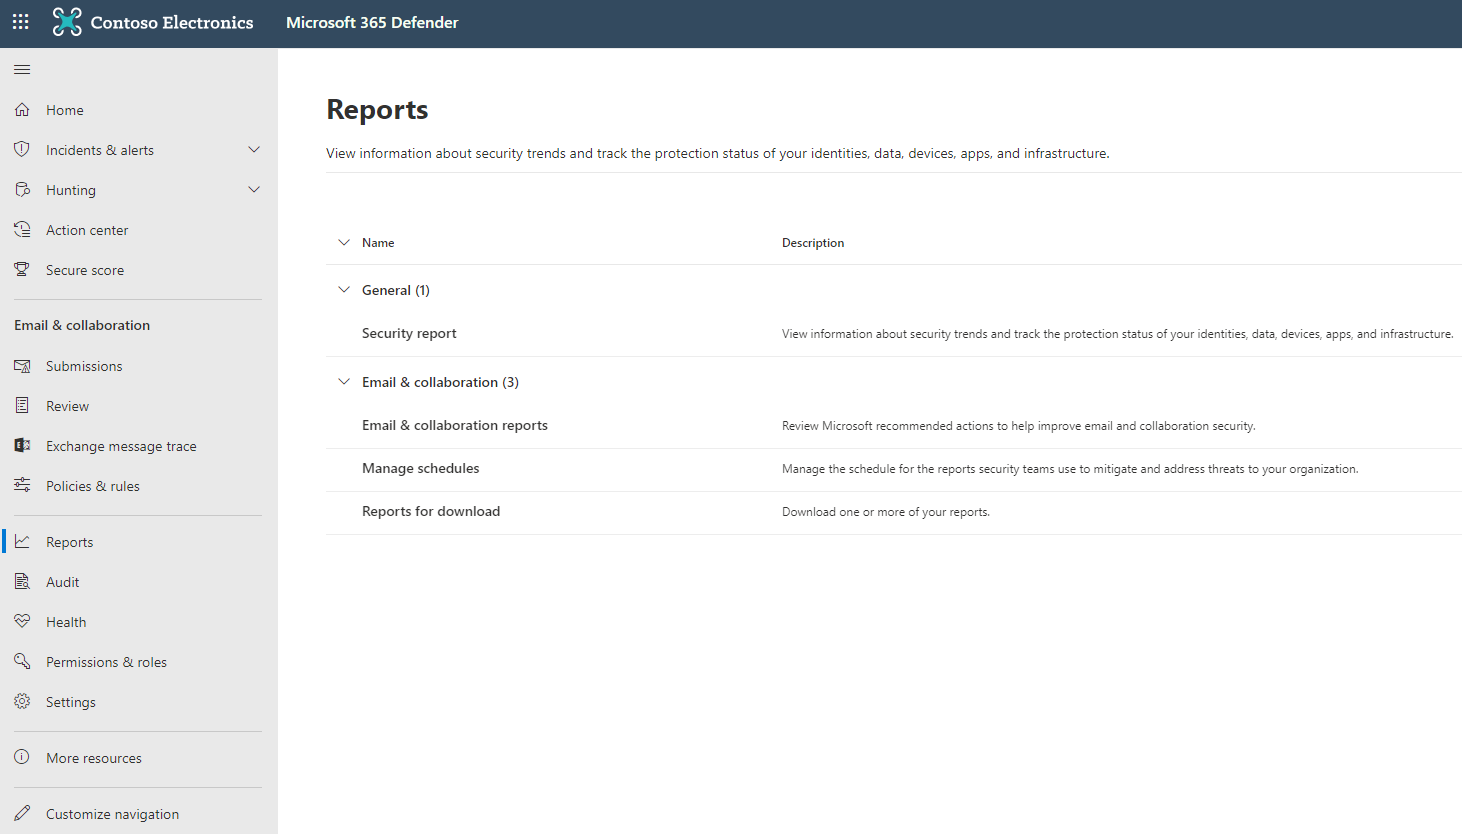 The Email & collaboration reports page in the Microsoft 365 Defender portal